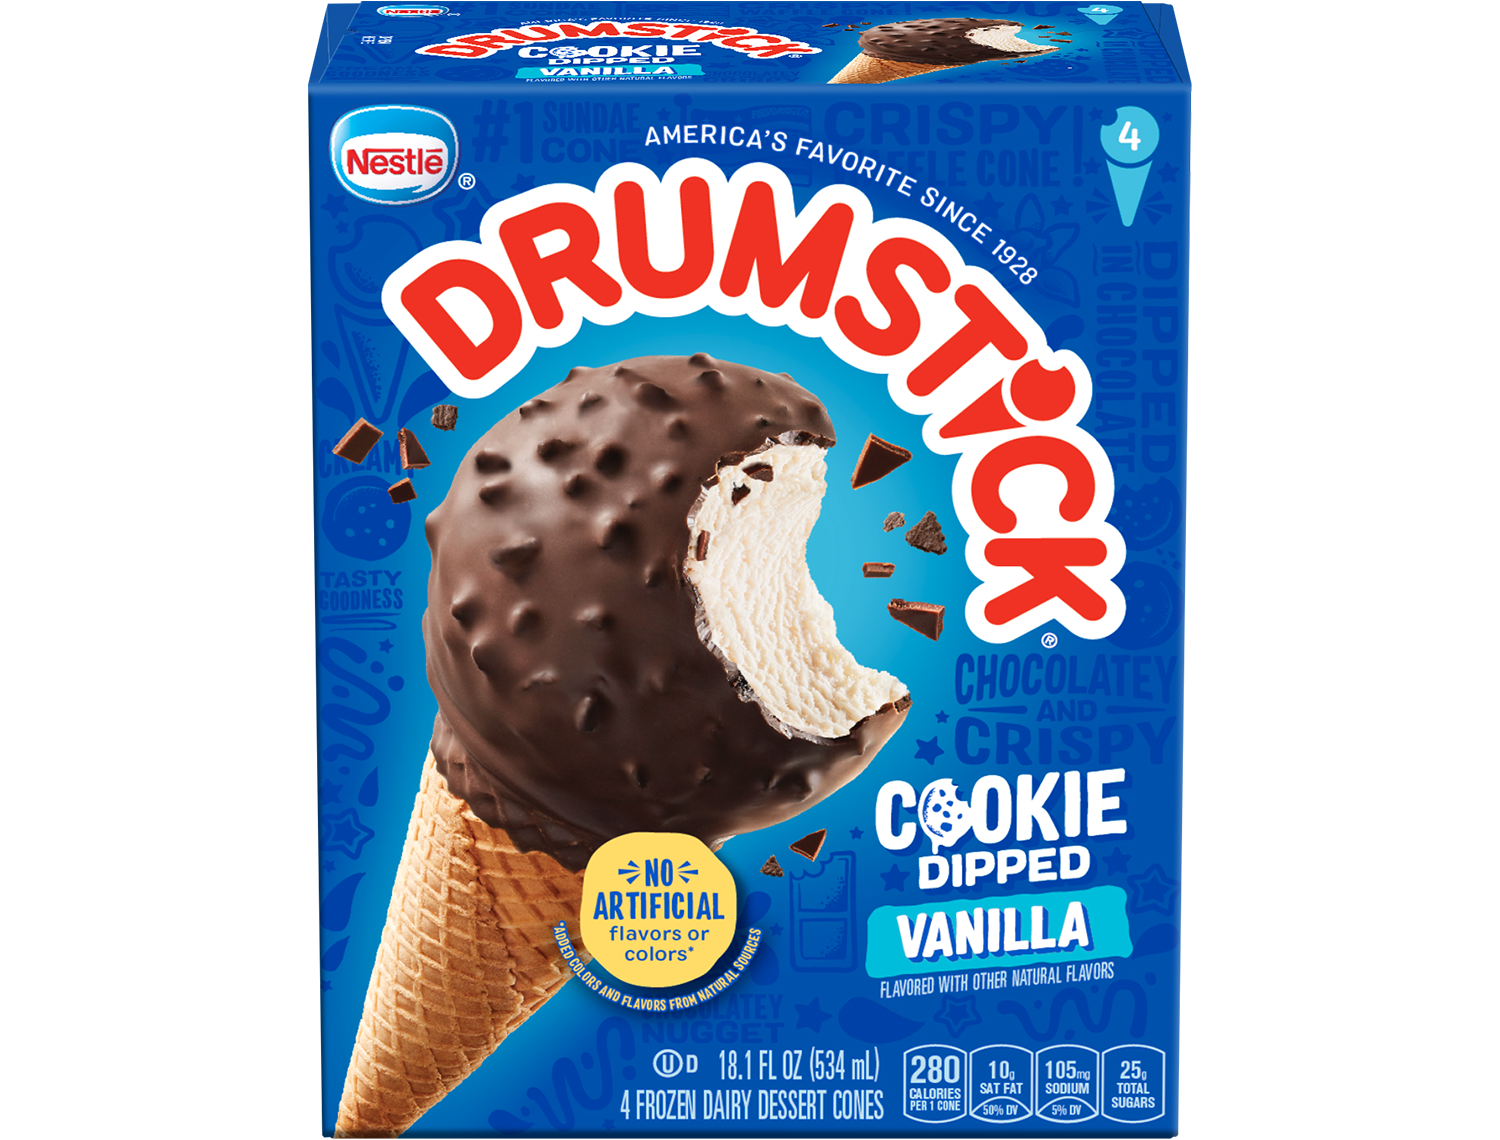 Drumstick cookie dipped box